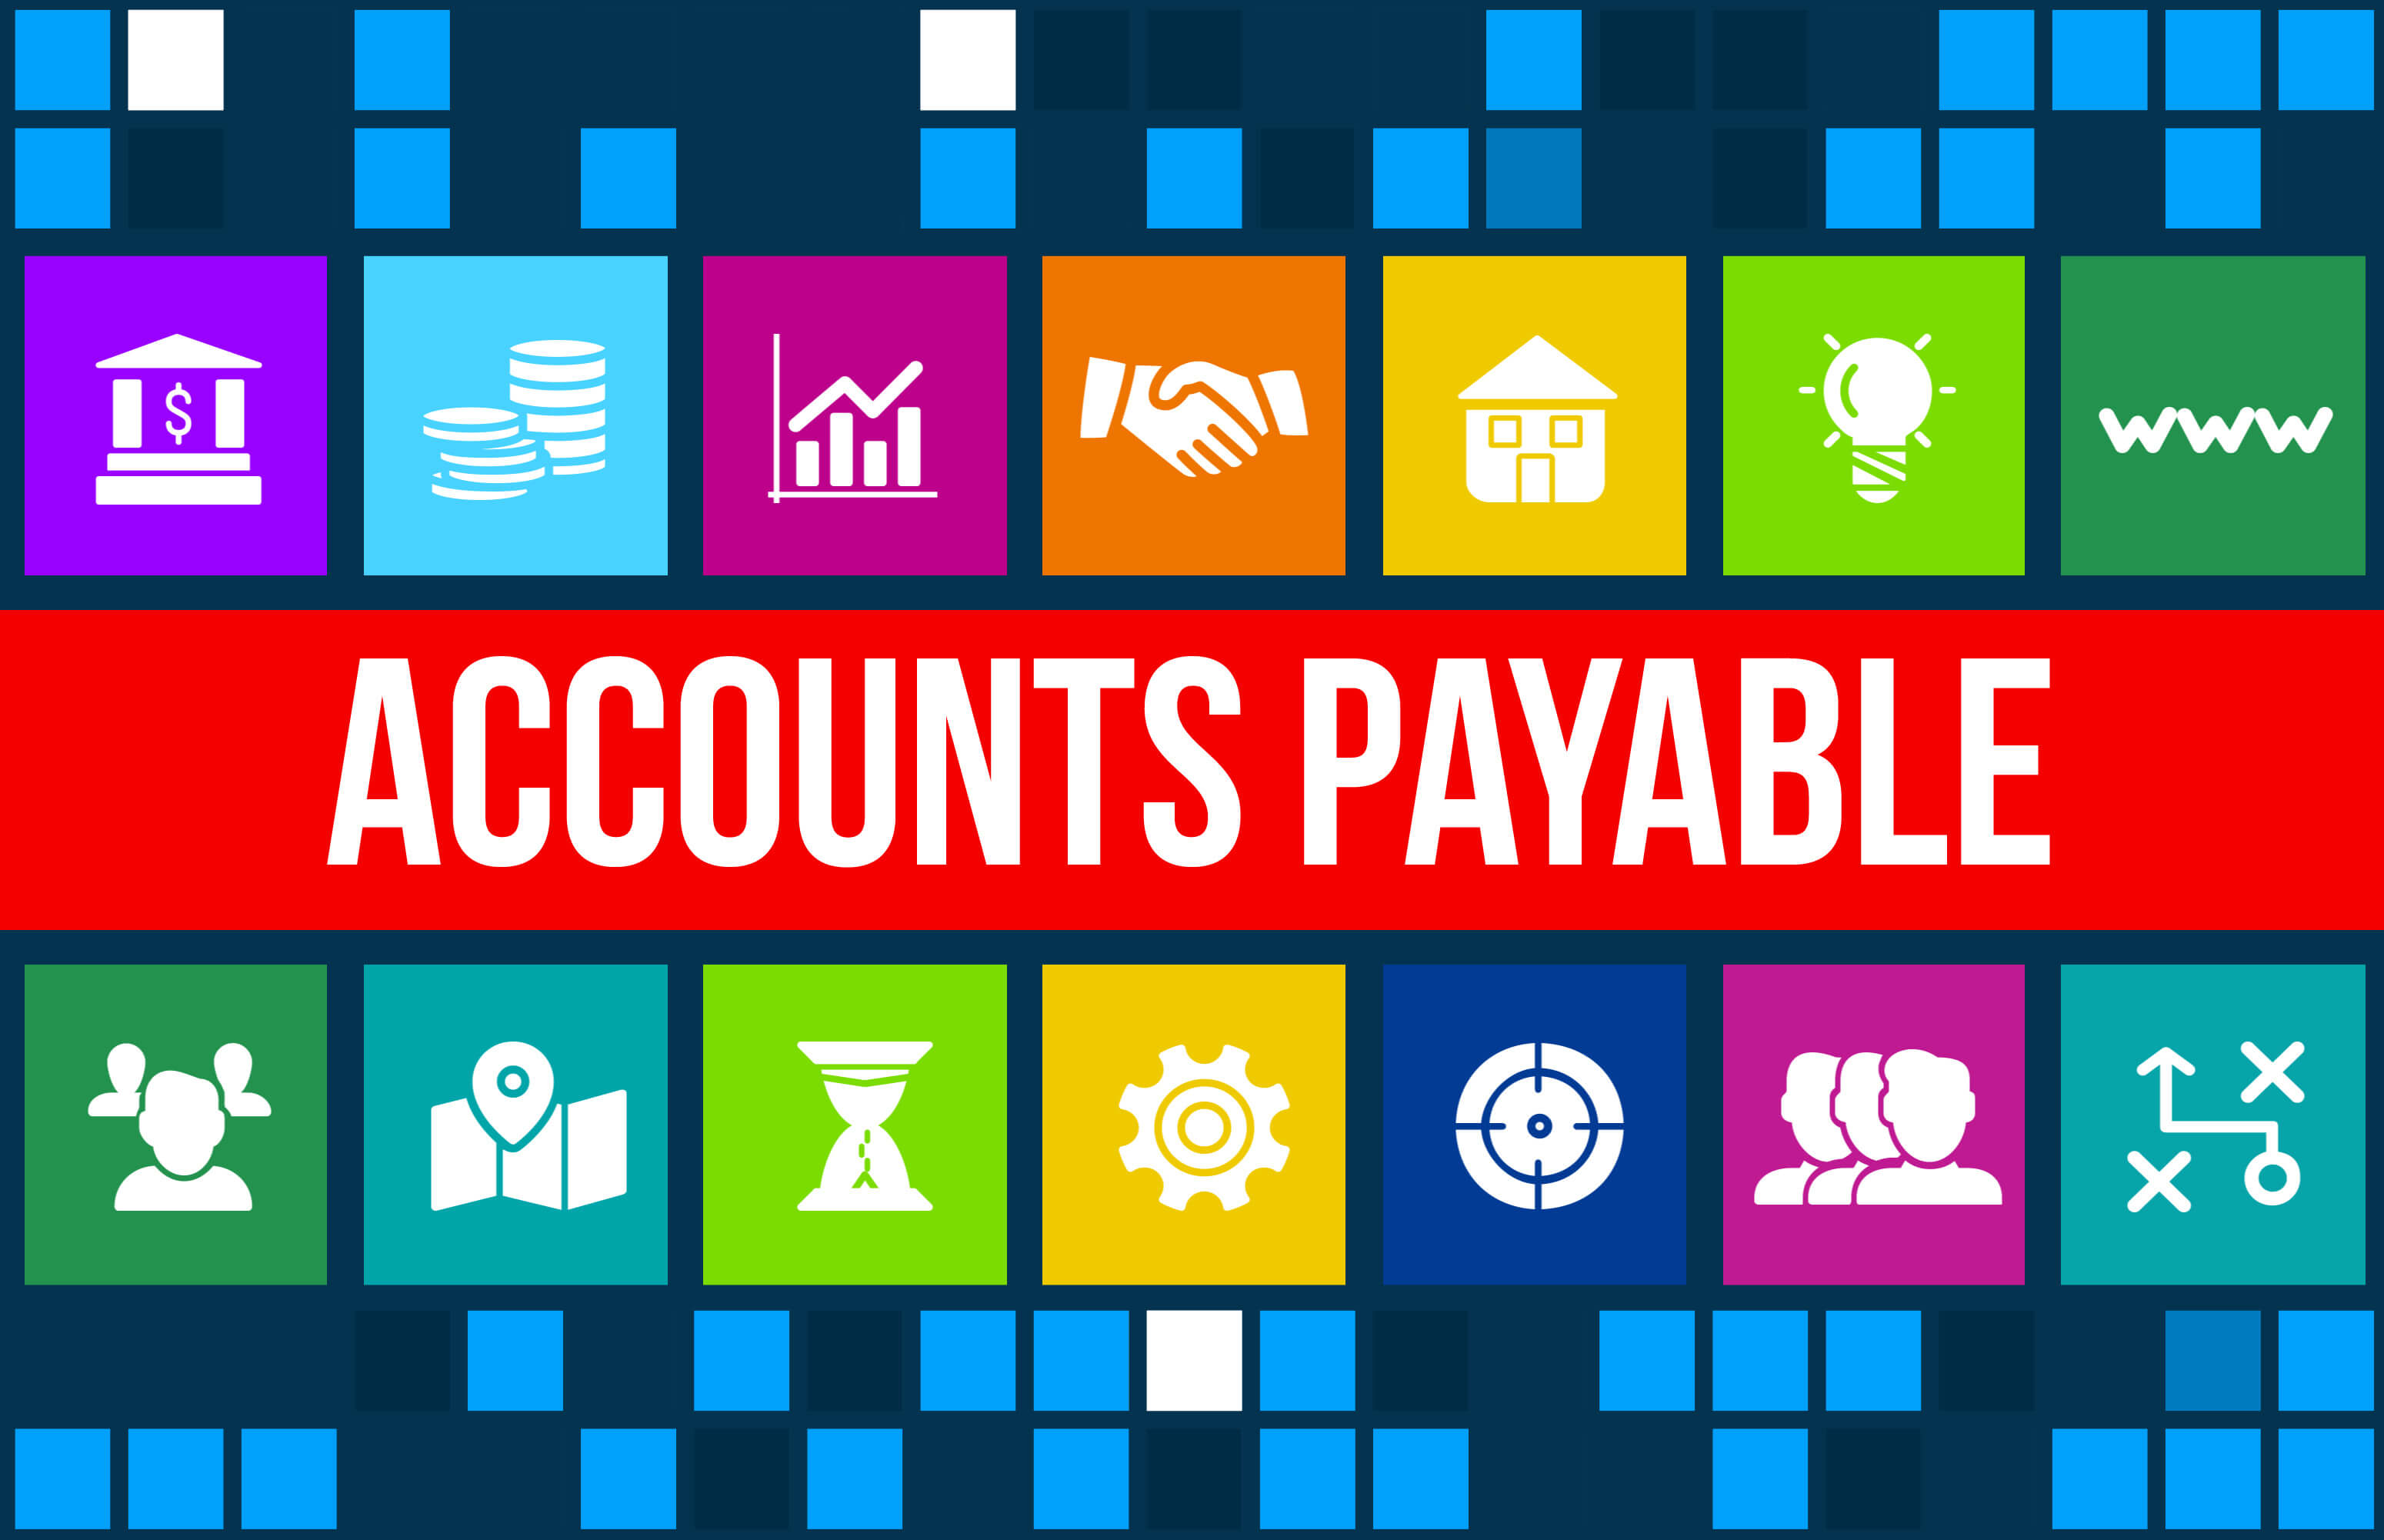 5 Tips for Successfully Managing Accounts Payable